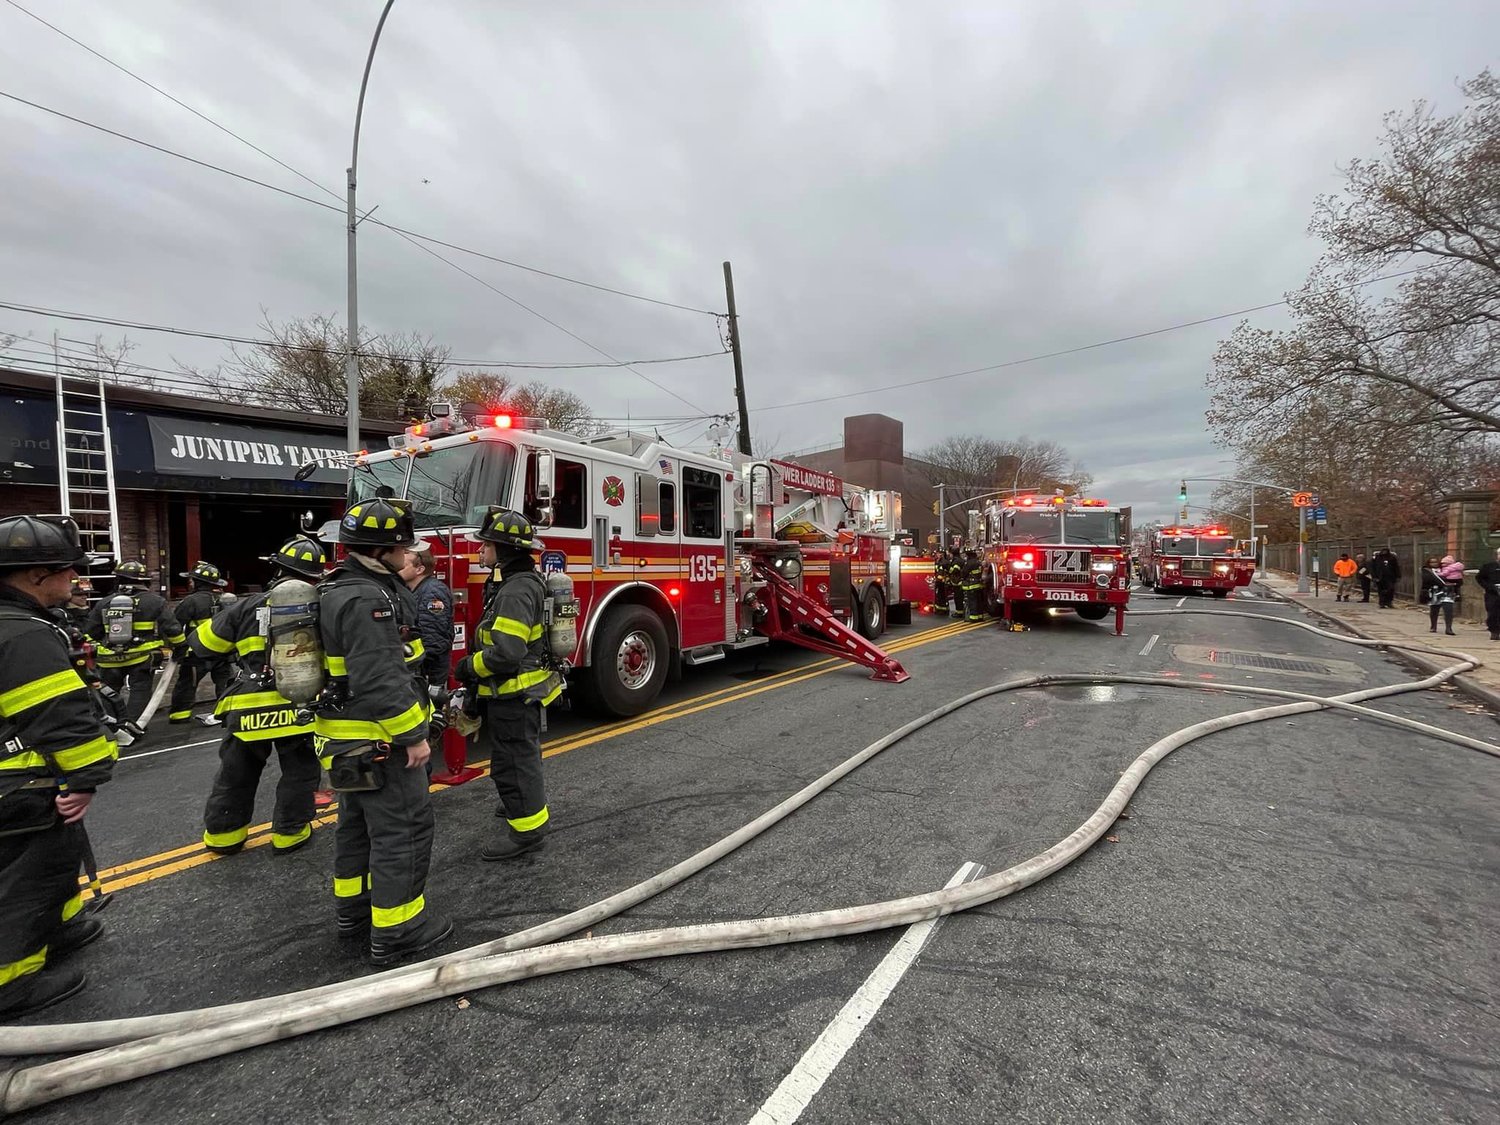 Firefighters at the scene of a 3-alarm fire on Metropolitan Avenue in Queens Nov. 30. A number of outages have beleaguered the FDNY’s emergency response system since the department’s computer-aided dispatch system went online last year. While an FDNY official said backups worked well, union heads said the outages have highlighted short-staffing.